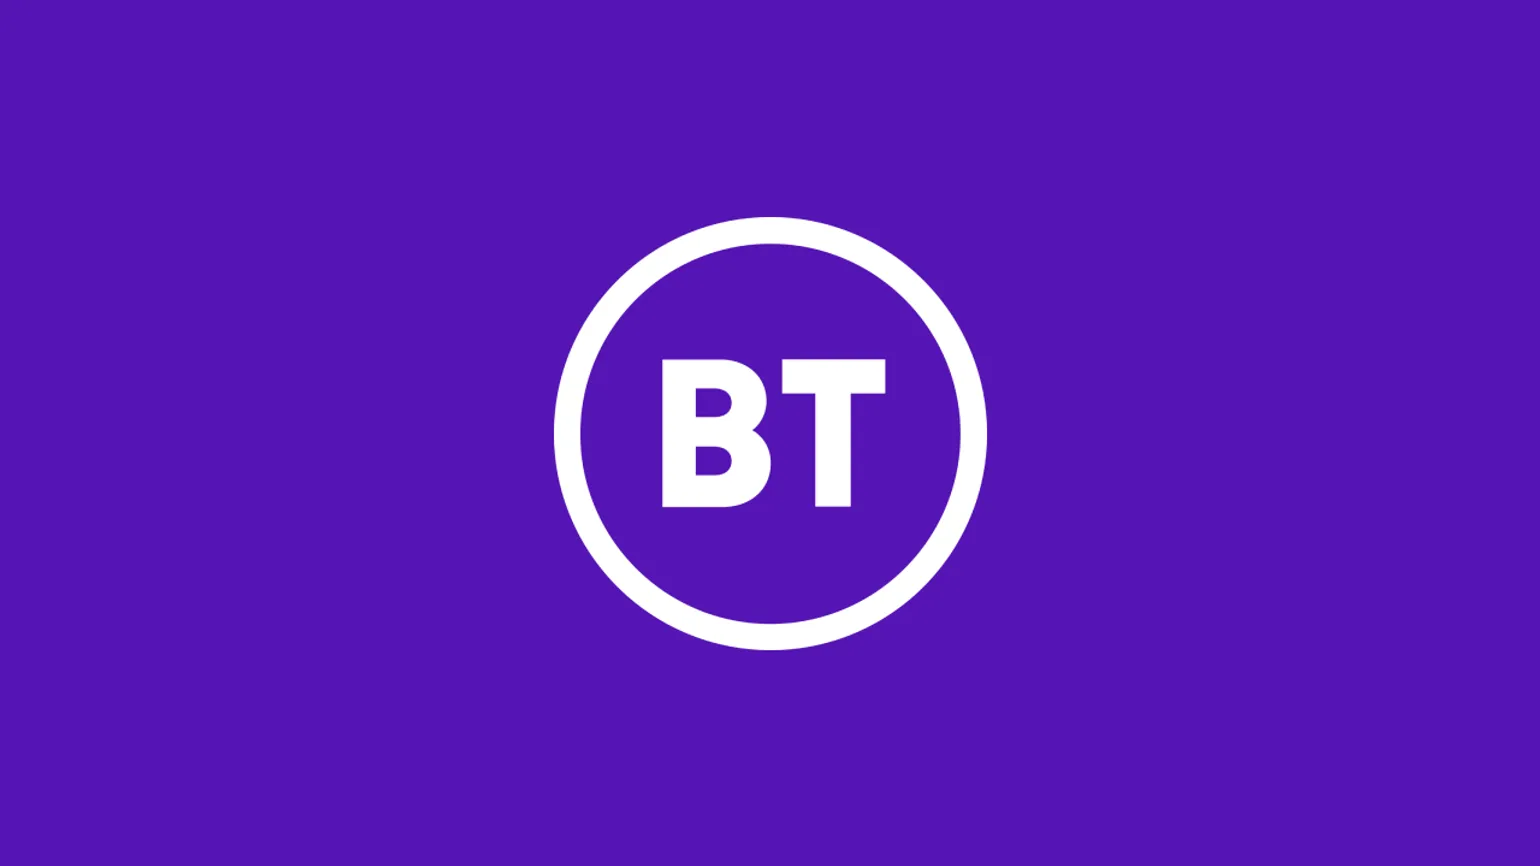 BT price increases